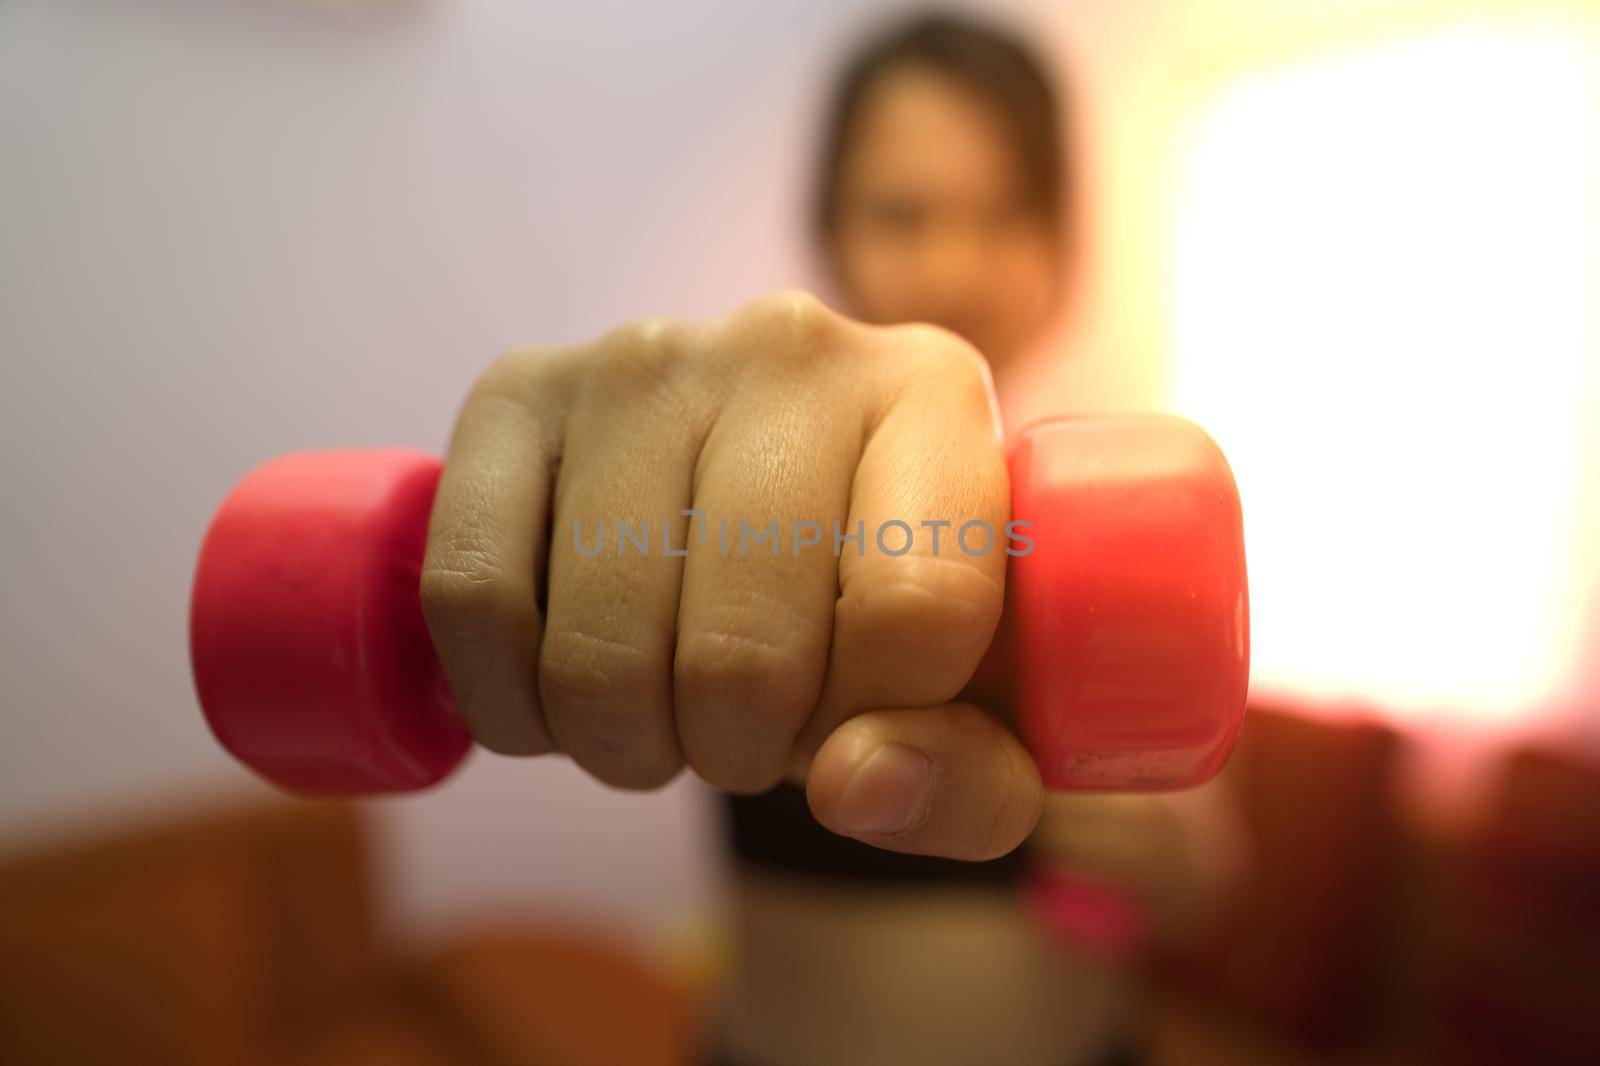 Asian woman training to lift pink dumbbells for building muscle, concept of staying healthy by weight loss and recreation at their own residence.